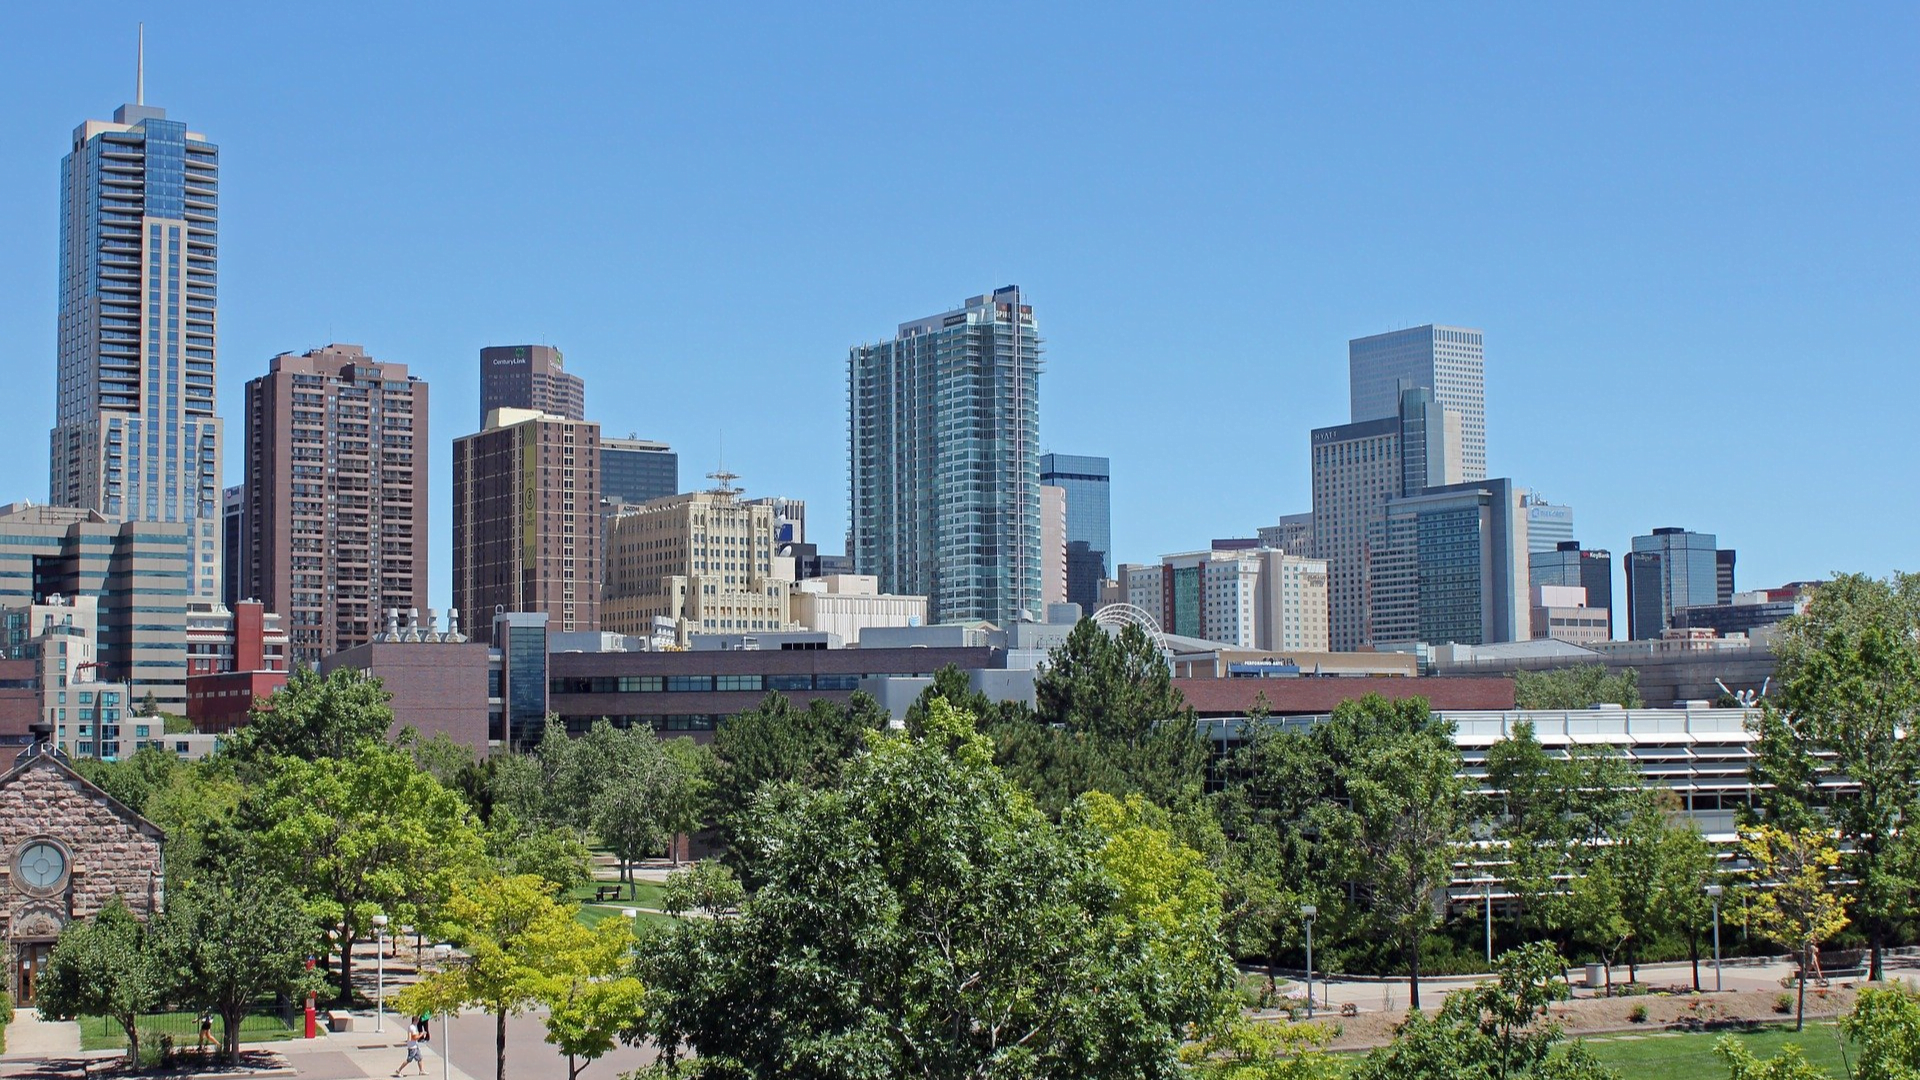 Denver skyline on a sunny summer day, facing east. Green deciduous trees make up the foreground.